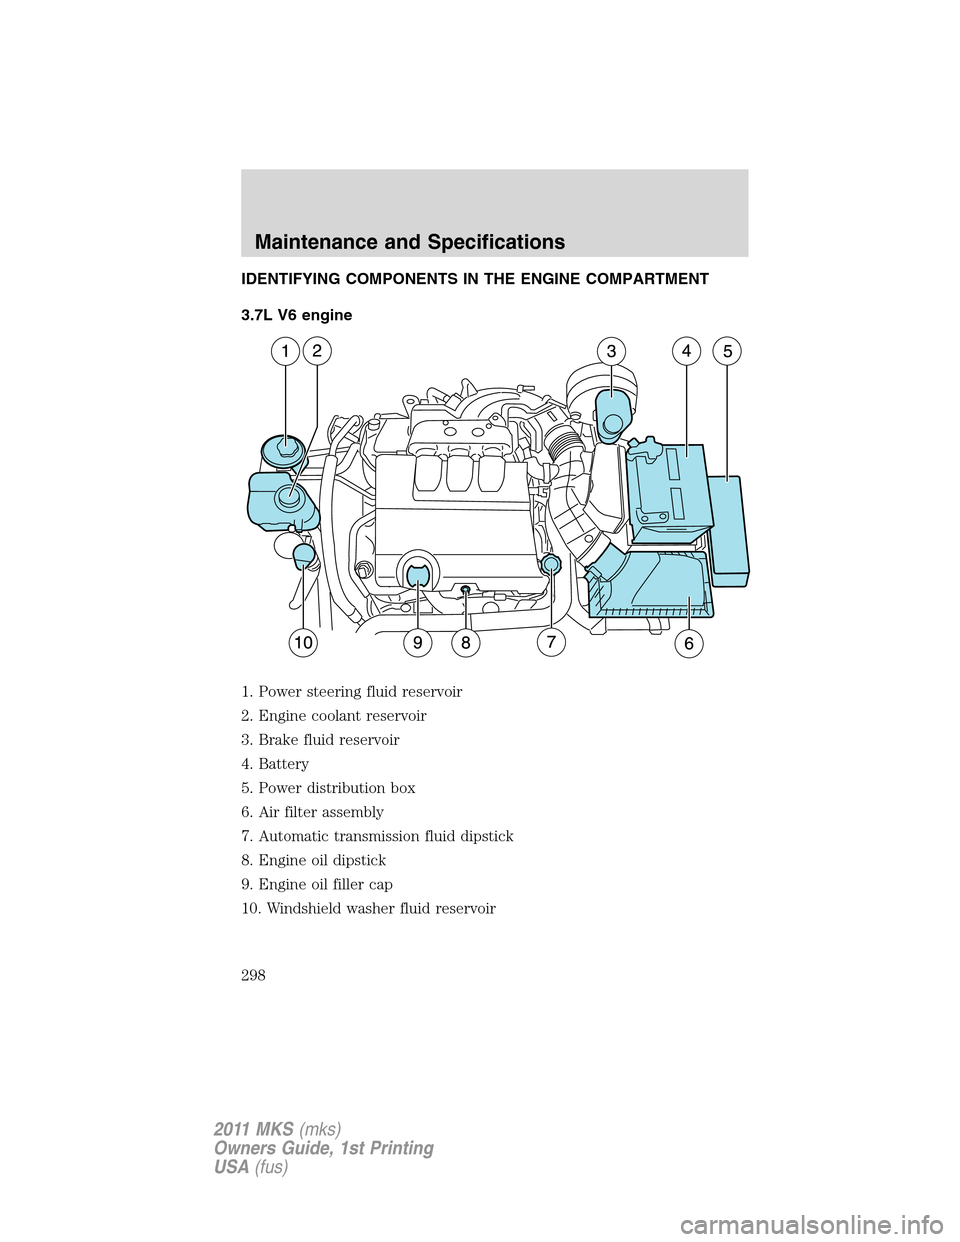 LINCOLN MKS 2011  Owners Manual IDENTIFYING COMPONENTS IN THE ENGINE COMPARTMENT
3.7L V6 engine
1. Power steering fluid reservoir
2. Engine coolant reservoir
3. Brake fluid reservoir
4. Battery
5. Power distribution box
6. Air filte